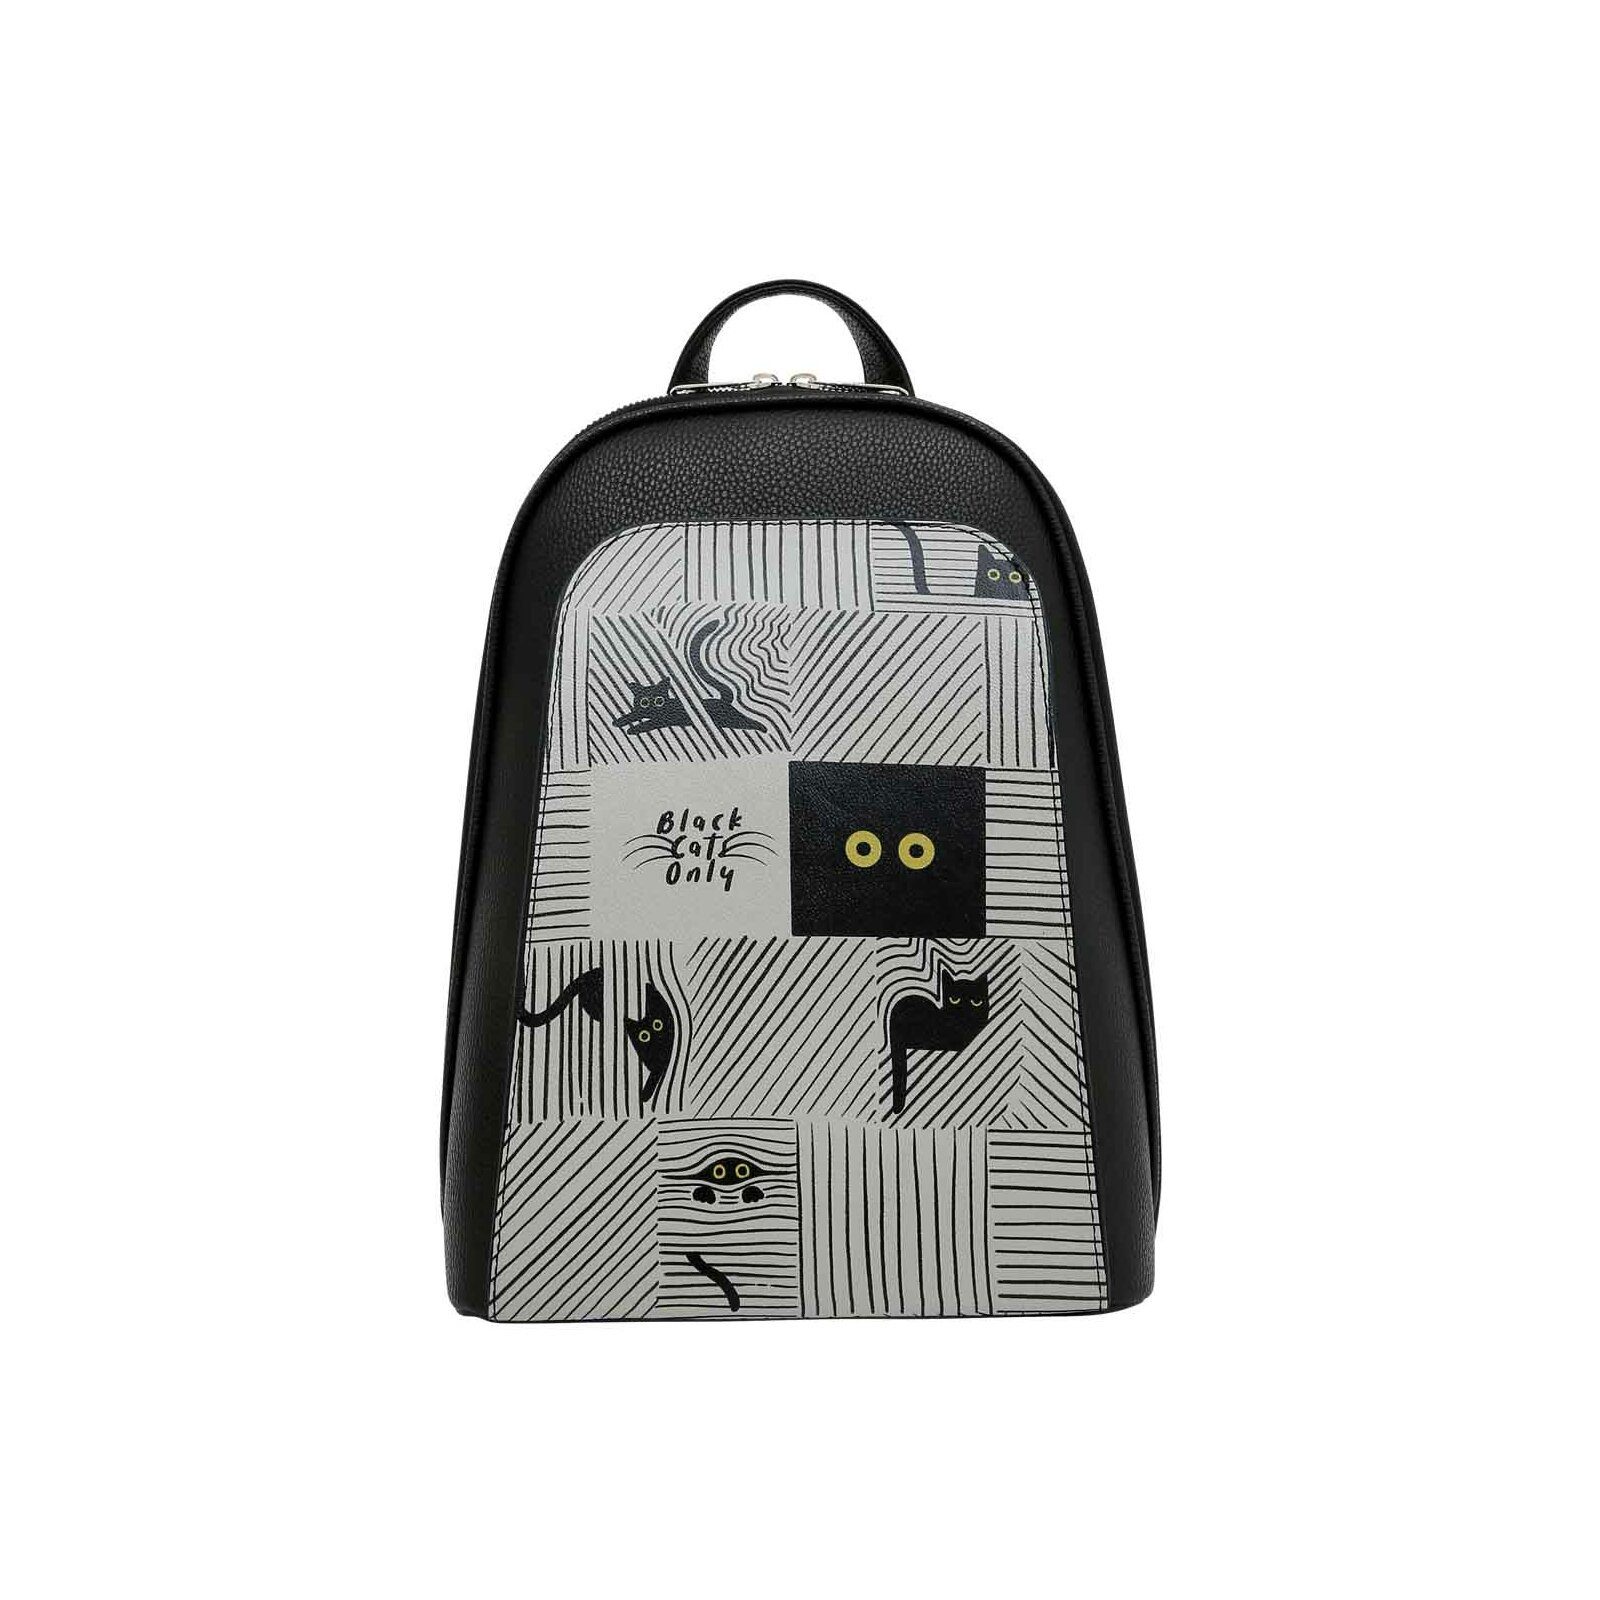 DOGO Tagesrucksack Black Cats Only